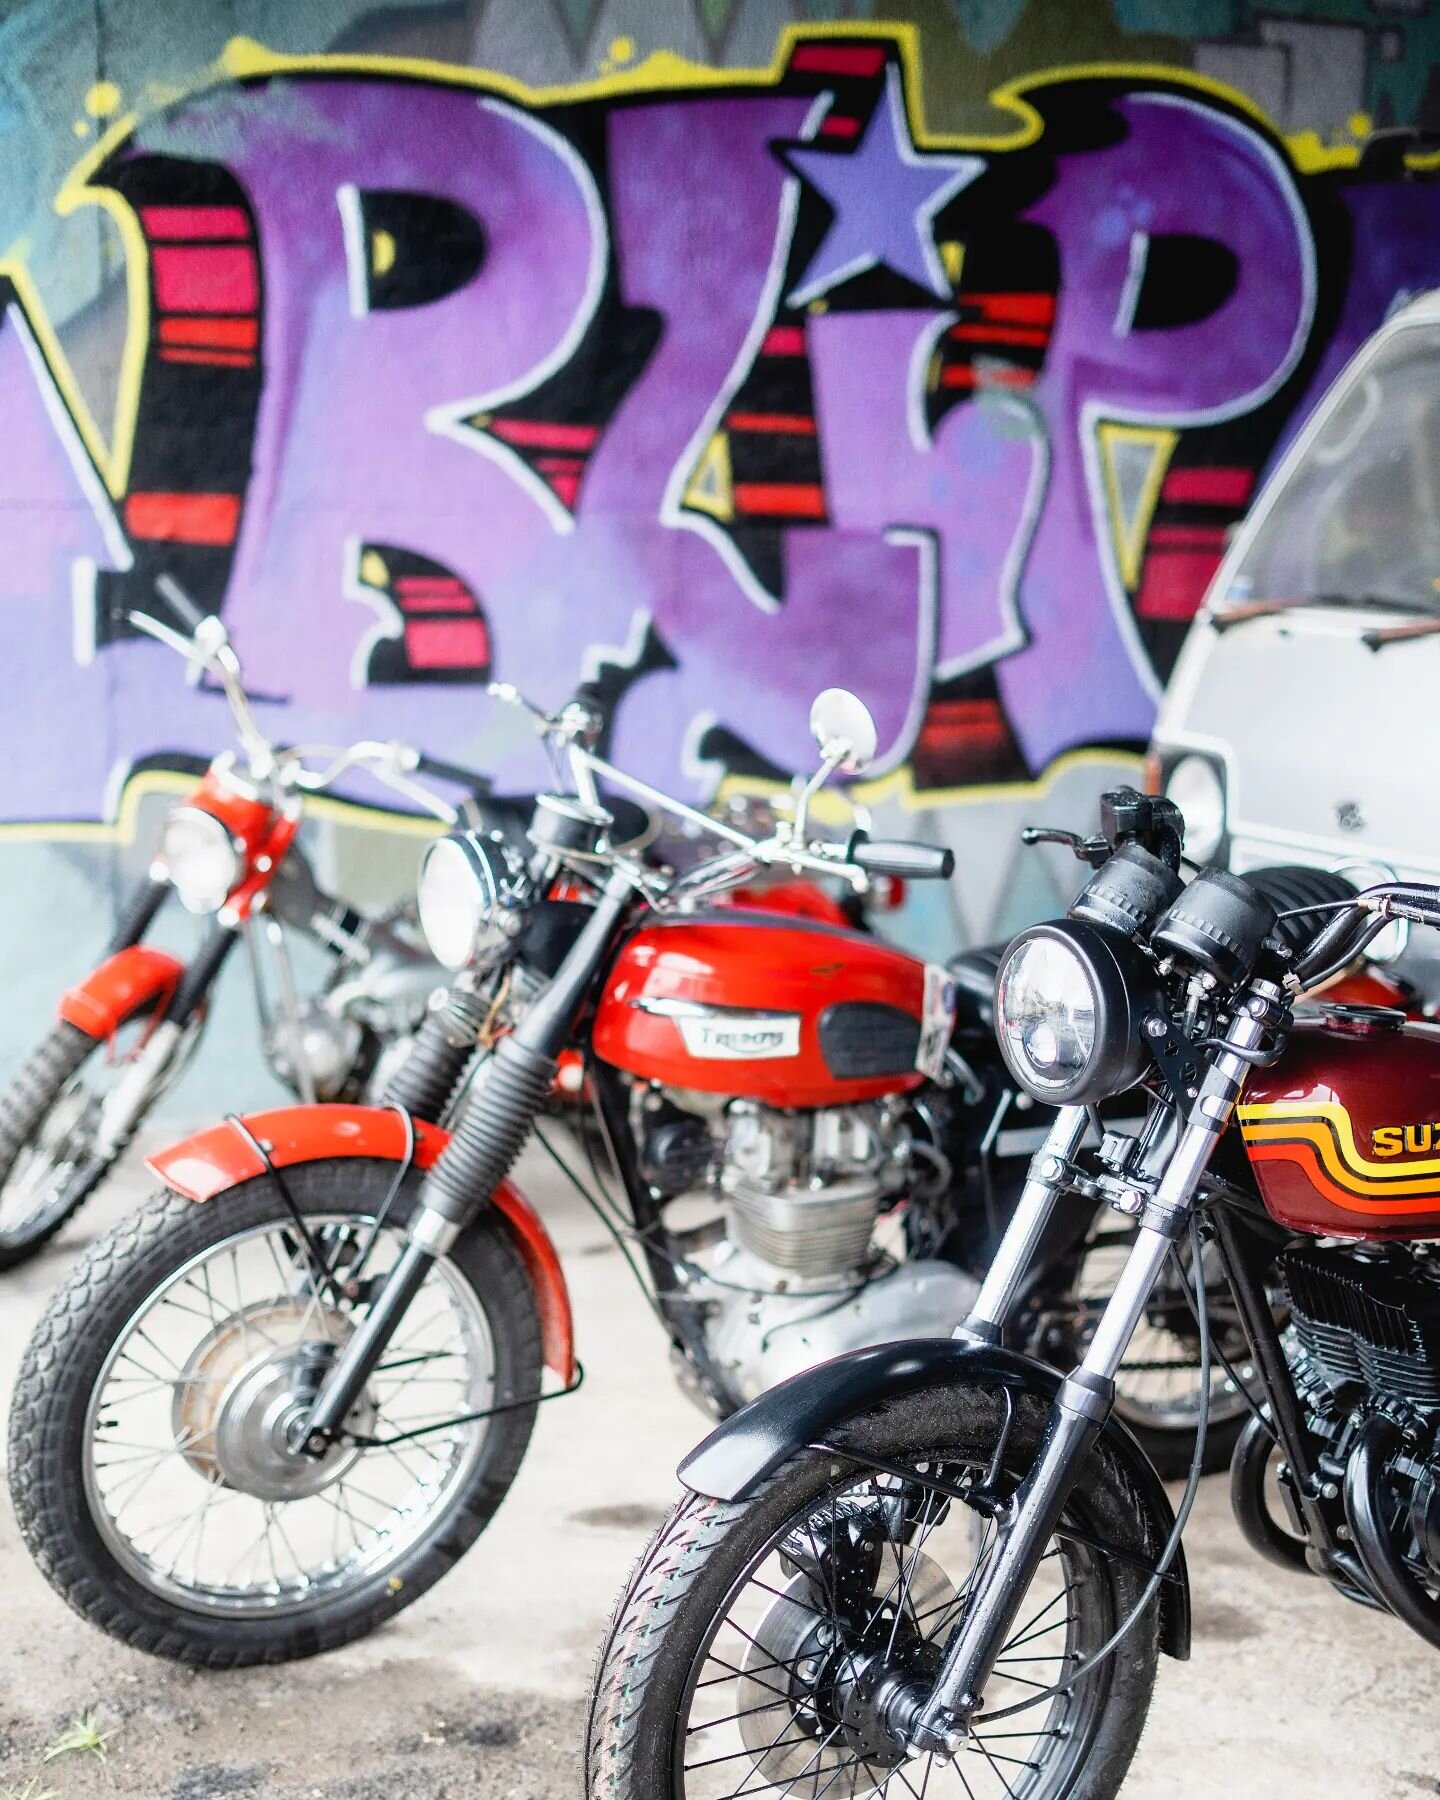 Hope y'all are having a great start to your week! 

📸 @thisis_harbor

#kccoffee #bliproasters #westbottoms #kc #kansascity #madeinkc #igkc #cafe #caferacer #croig #ironandair #suzuki #triumph #subaru #graffiti #built #builtnotbought